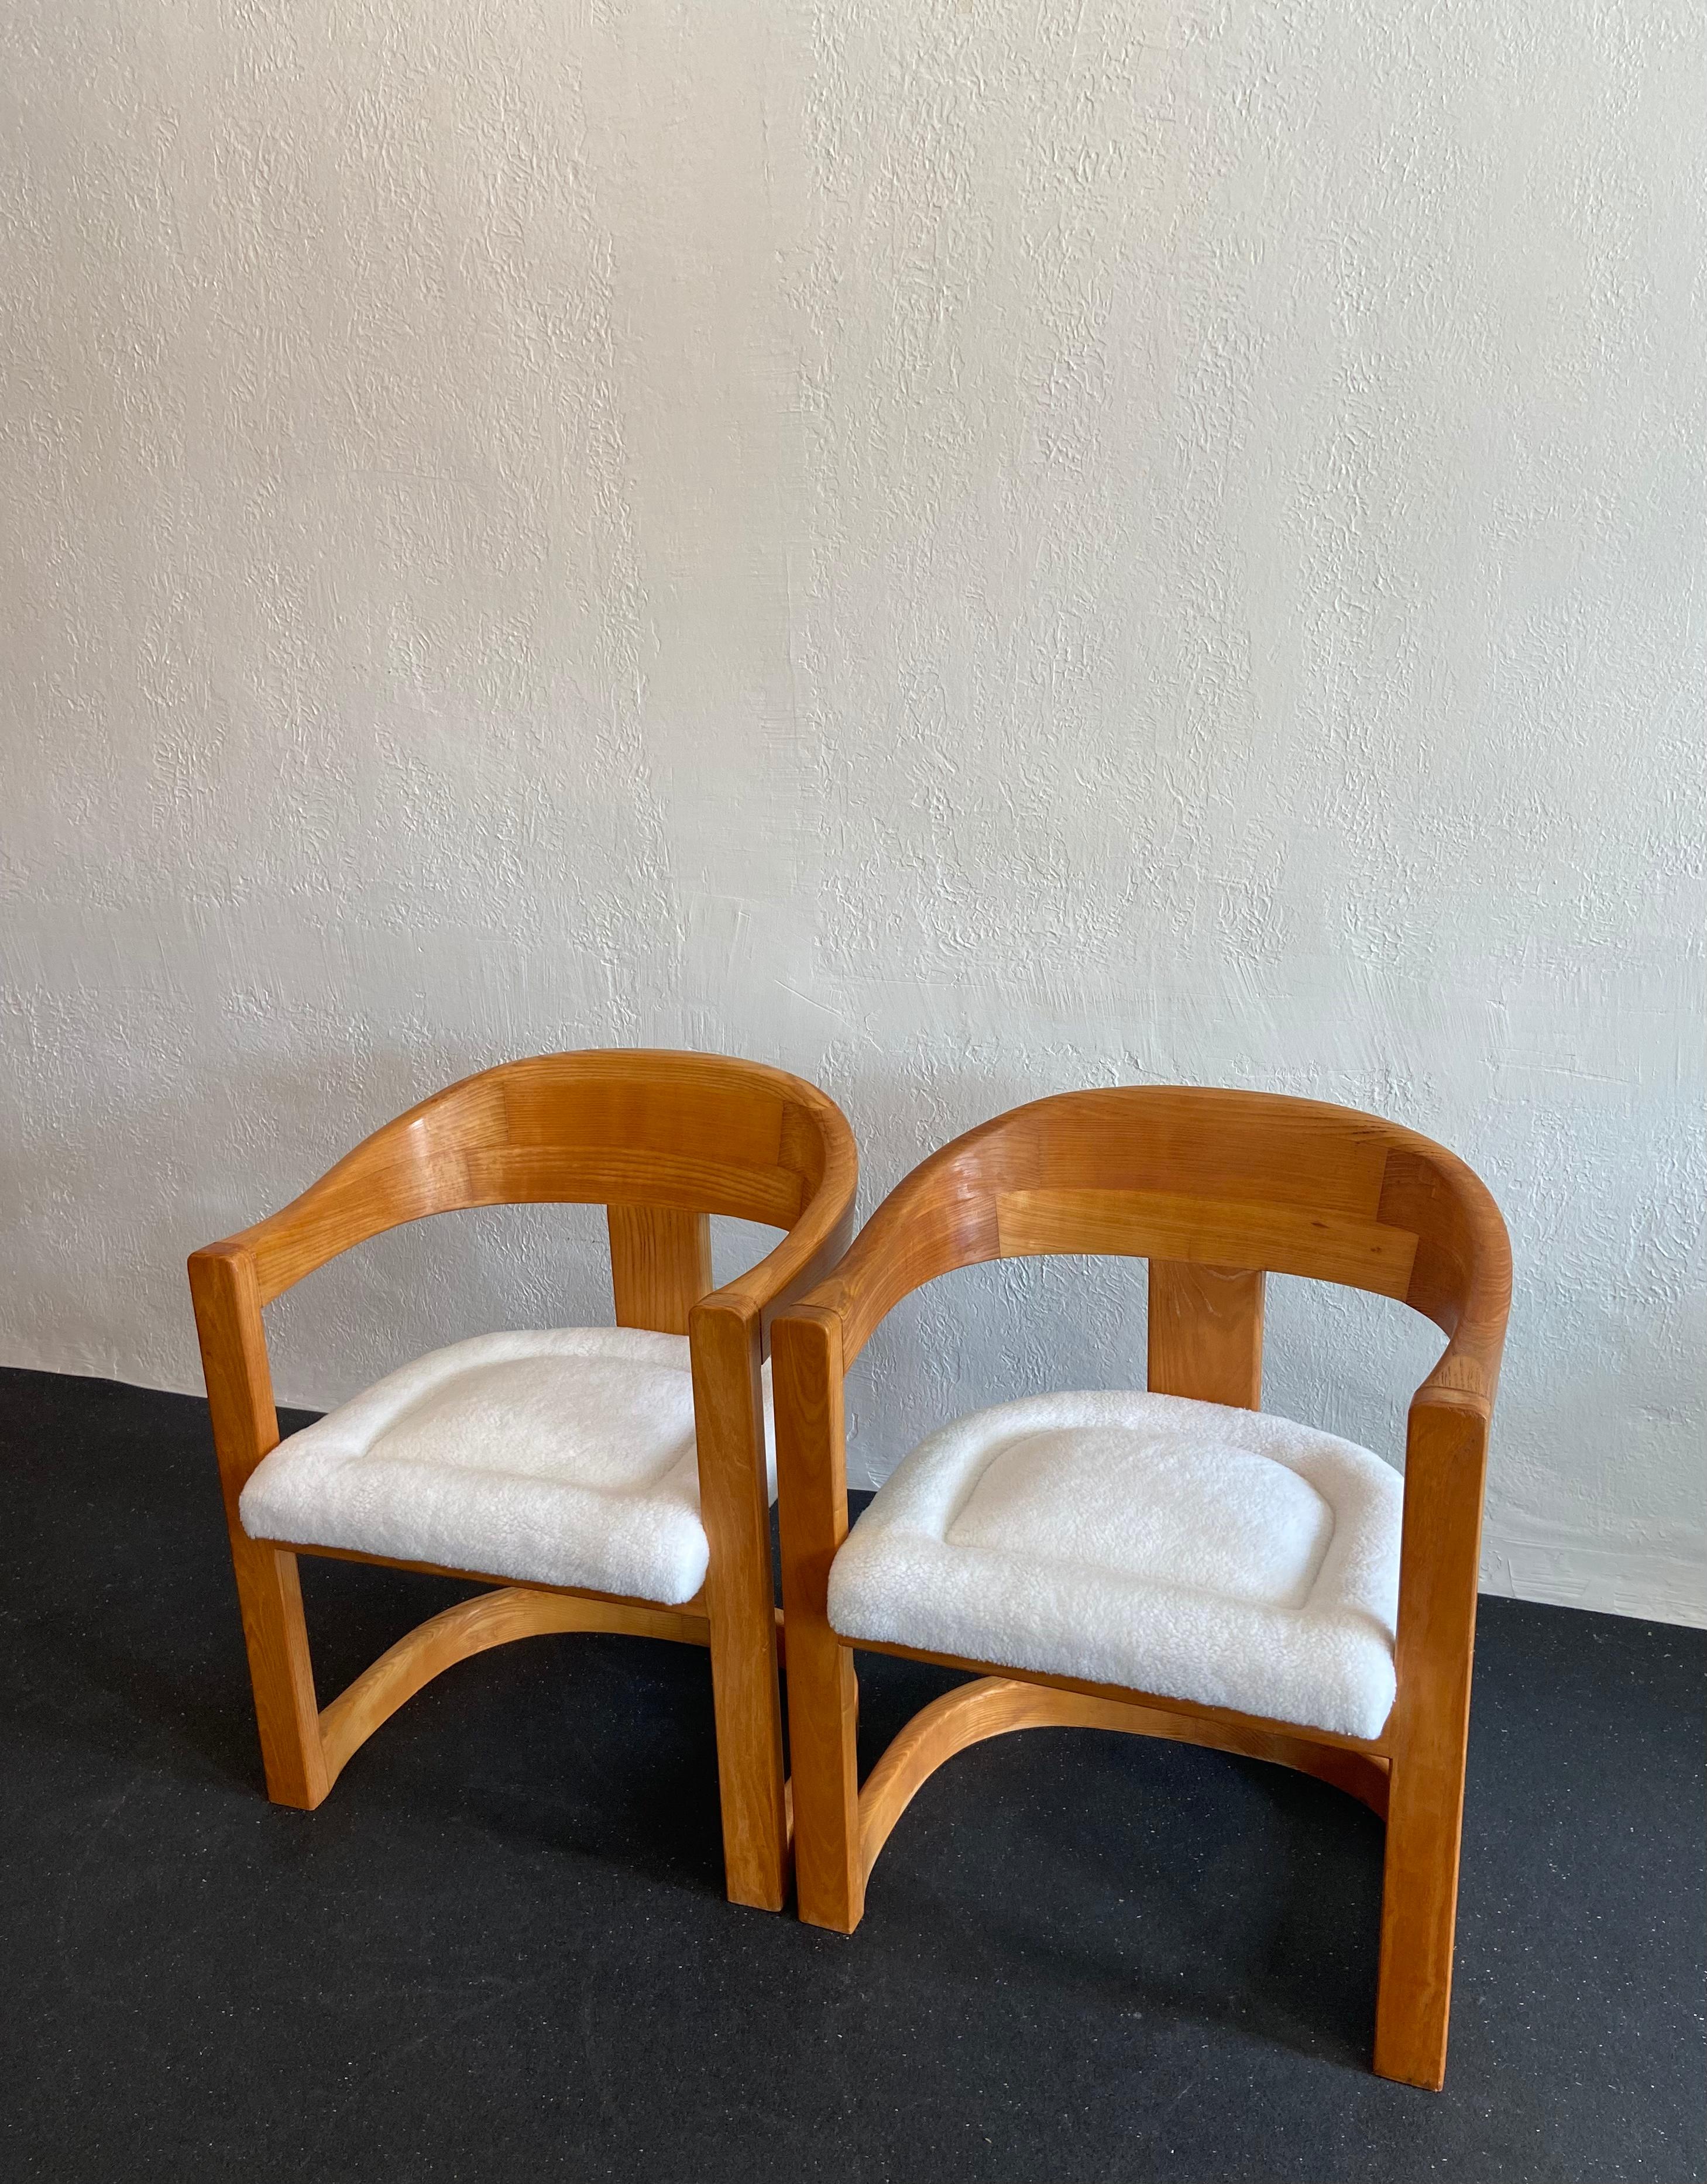 Pair of Onassis chairs in oak by Karl Springer. Updated upholstery in faux Sherpa. 

Would work well in a variety of interiors such as modern, mid century modern, Hollywood regency, etc. Piece blends seamlessly with other designers such as Warren